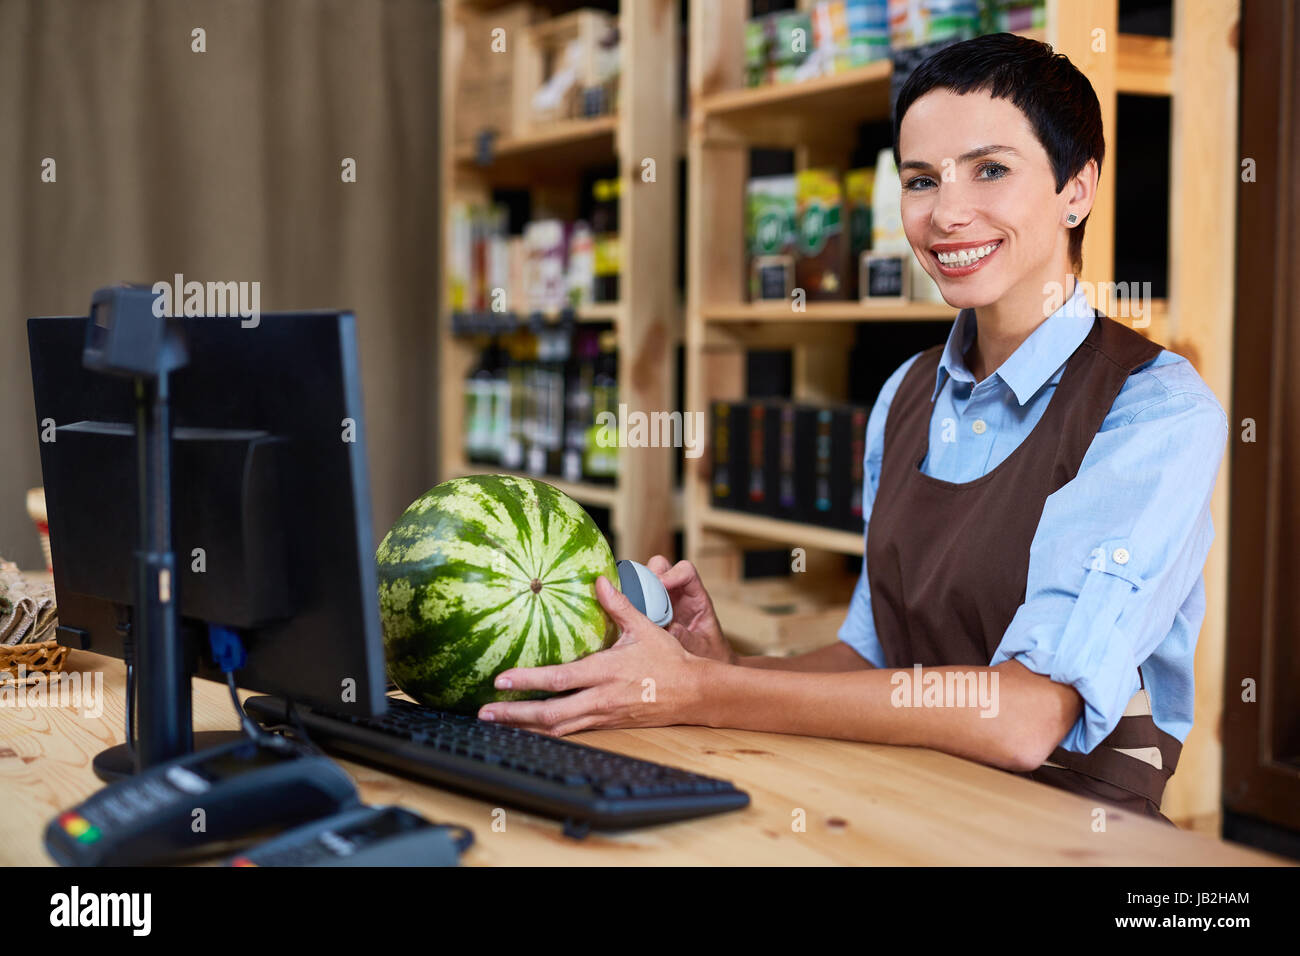 Pretty Cashier at Wooden Counter Stock Photo